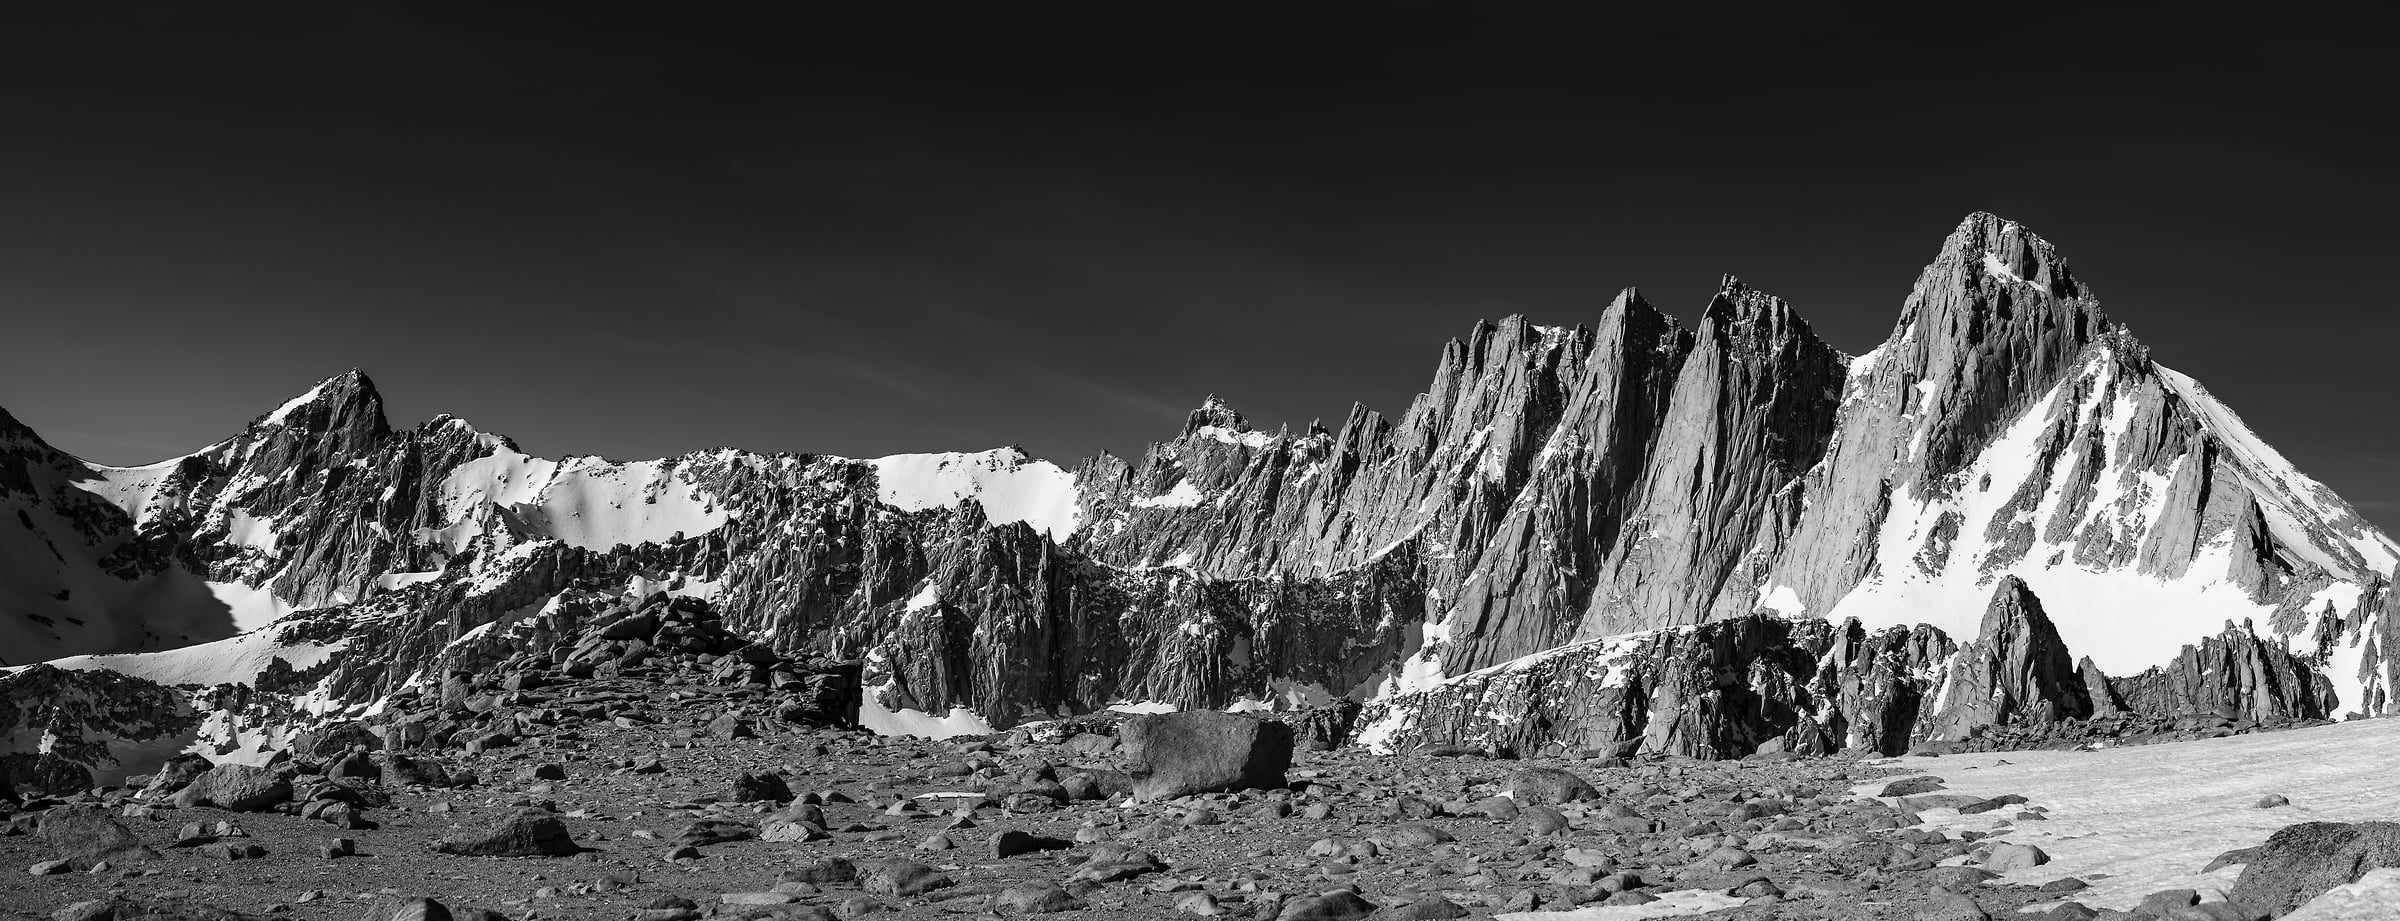 176 megapixels! A very high resolution, panorama photo print of Mount Whitney; landscape photograph created by Scott Rinckenberger of Mount Whitney in the Sierra Nevada Mountains, California.